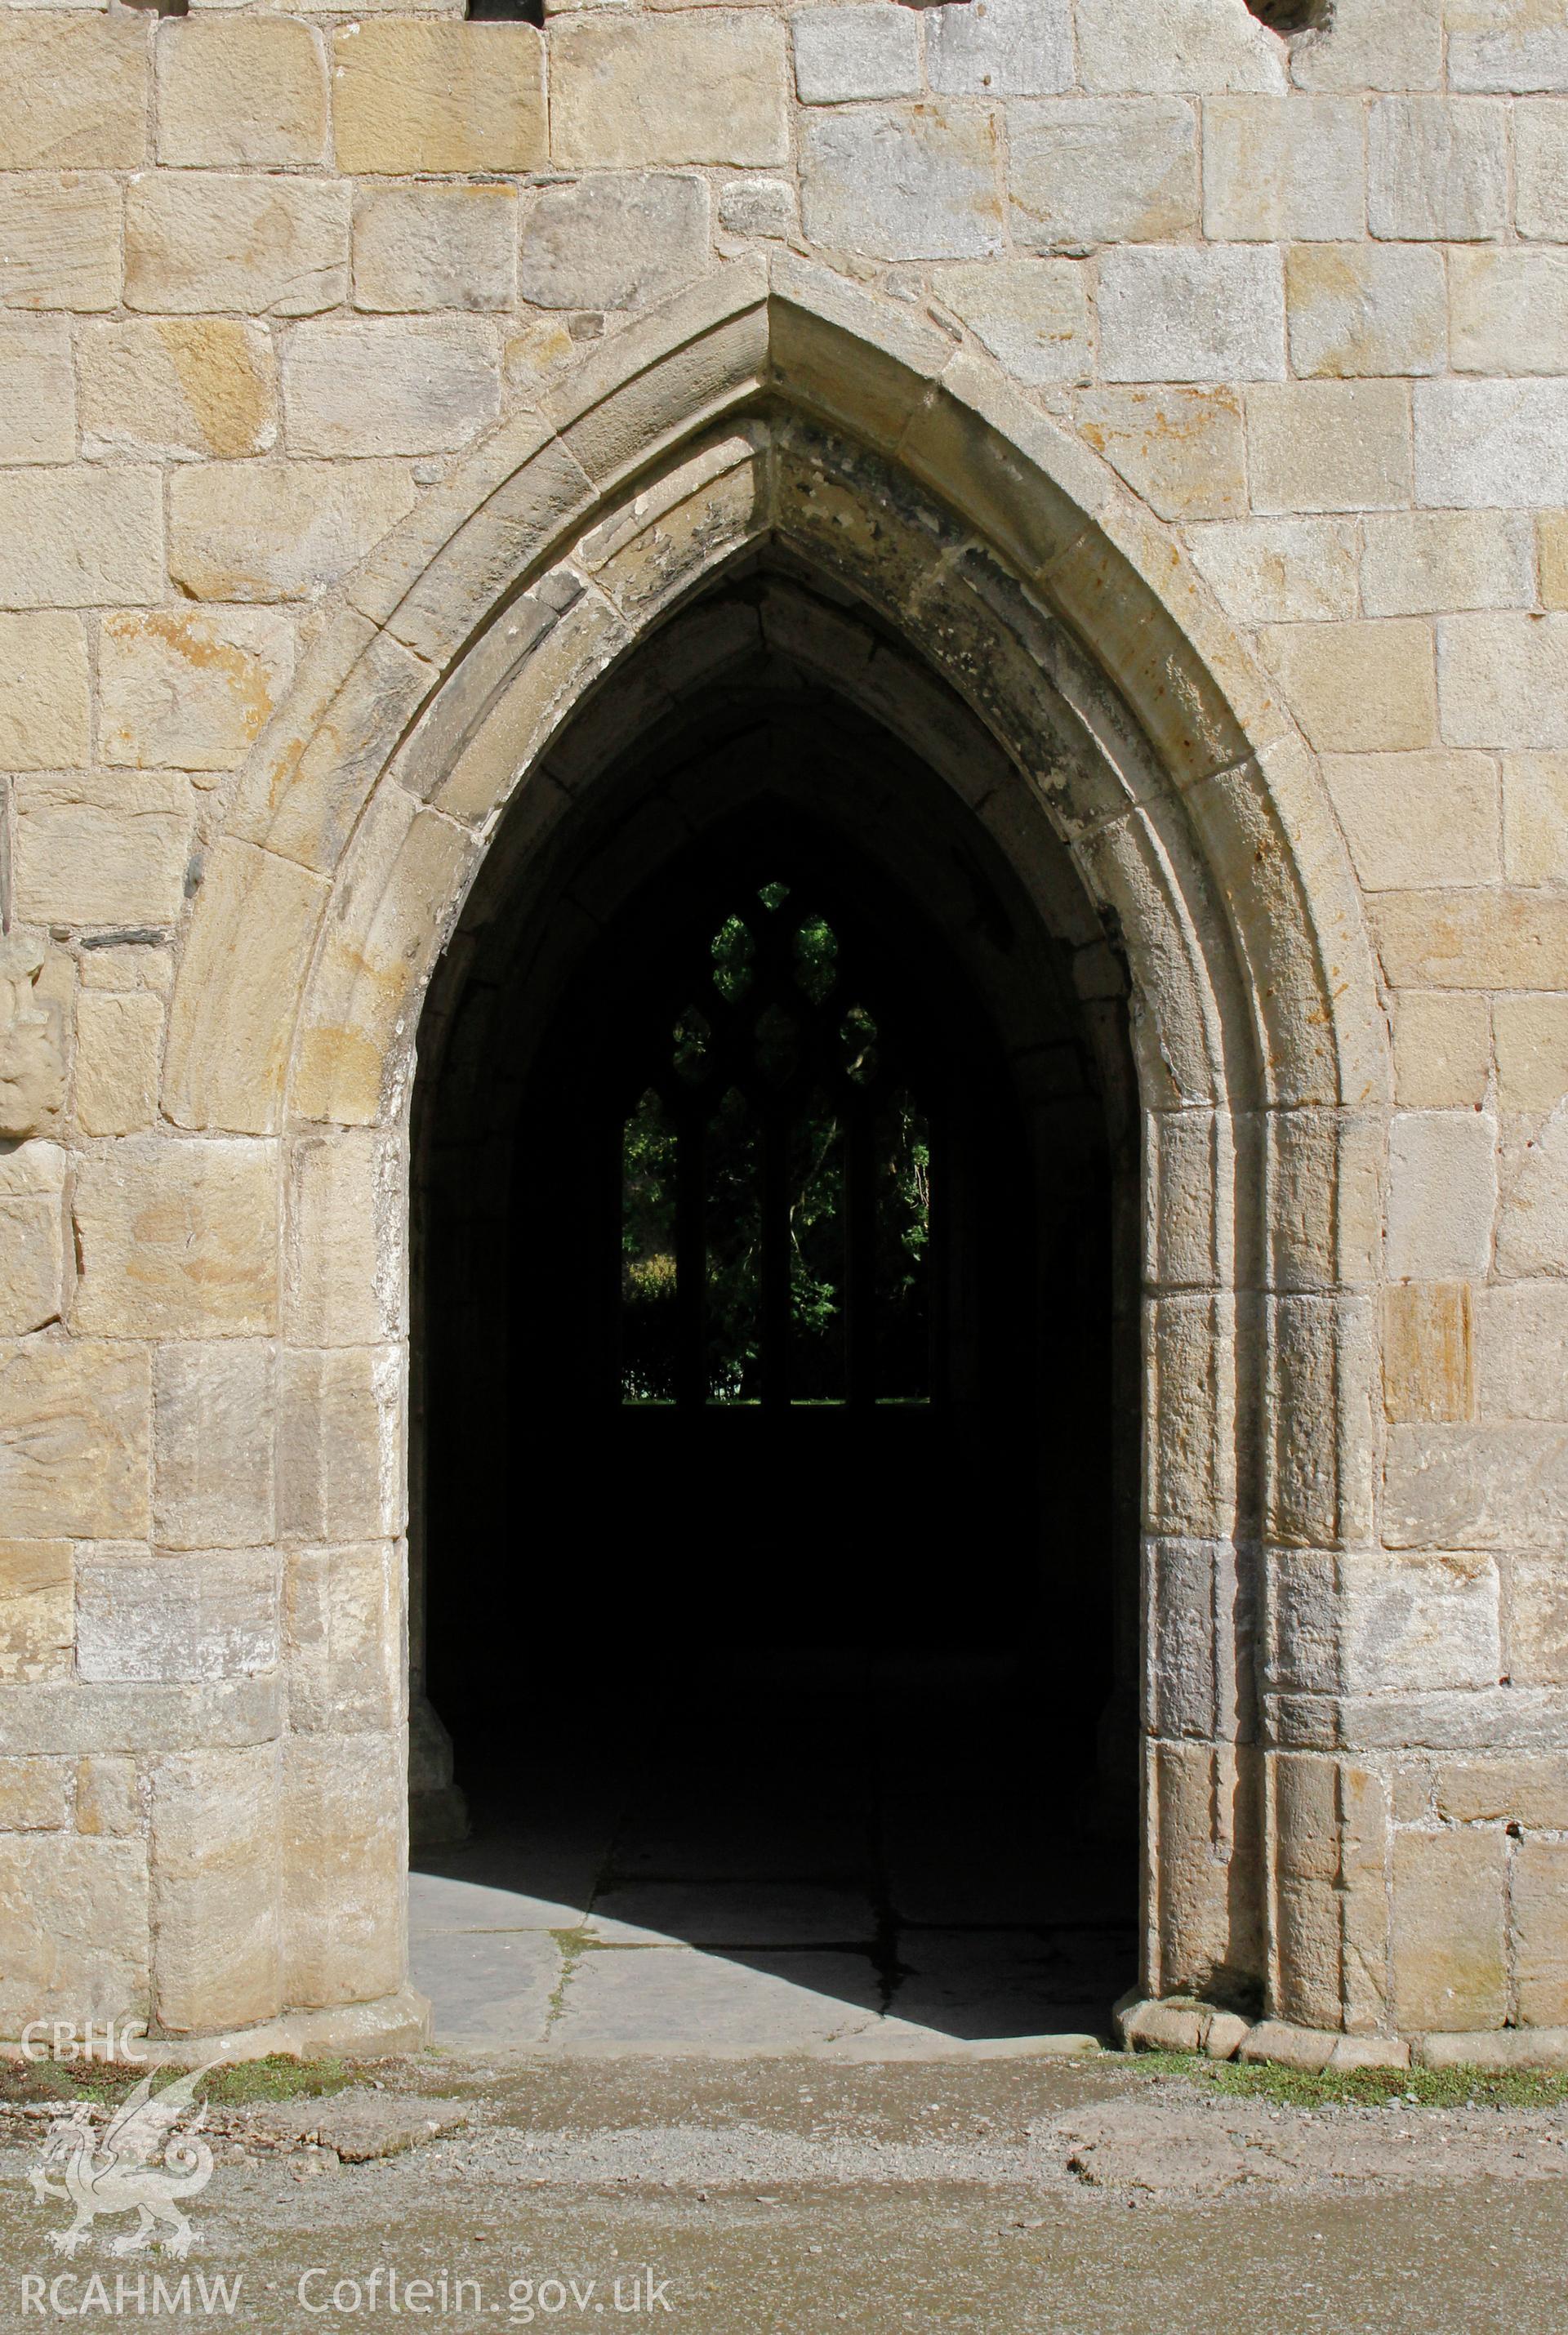 Valle Crucis Abbey: East range of cloisters from west - Sacristy door